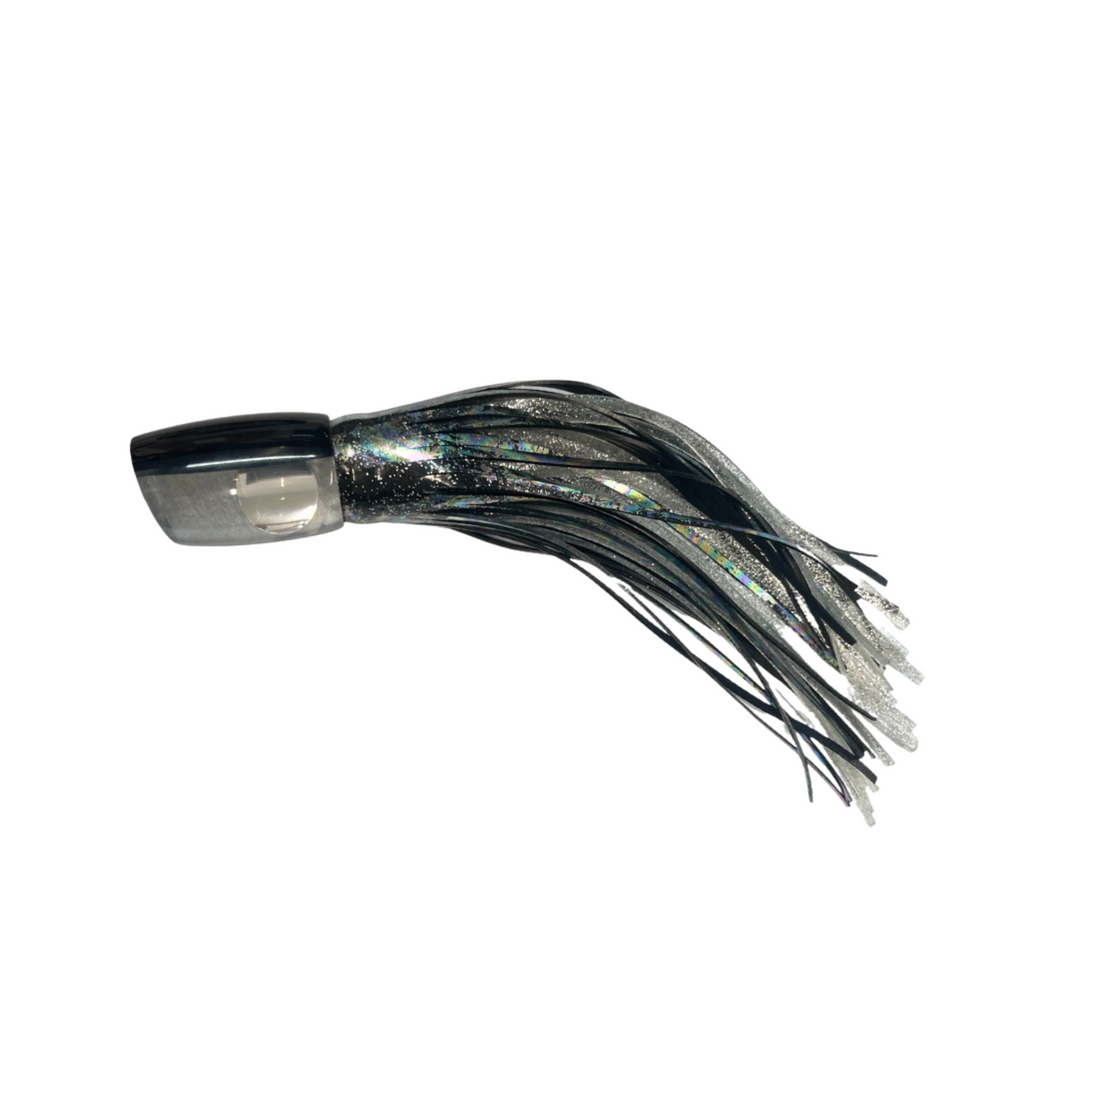 FRANTIC CHAOS 10.5 LURE